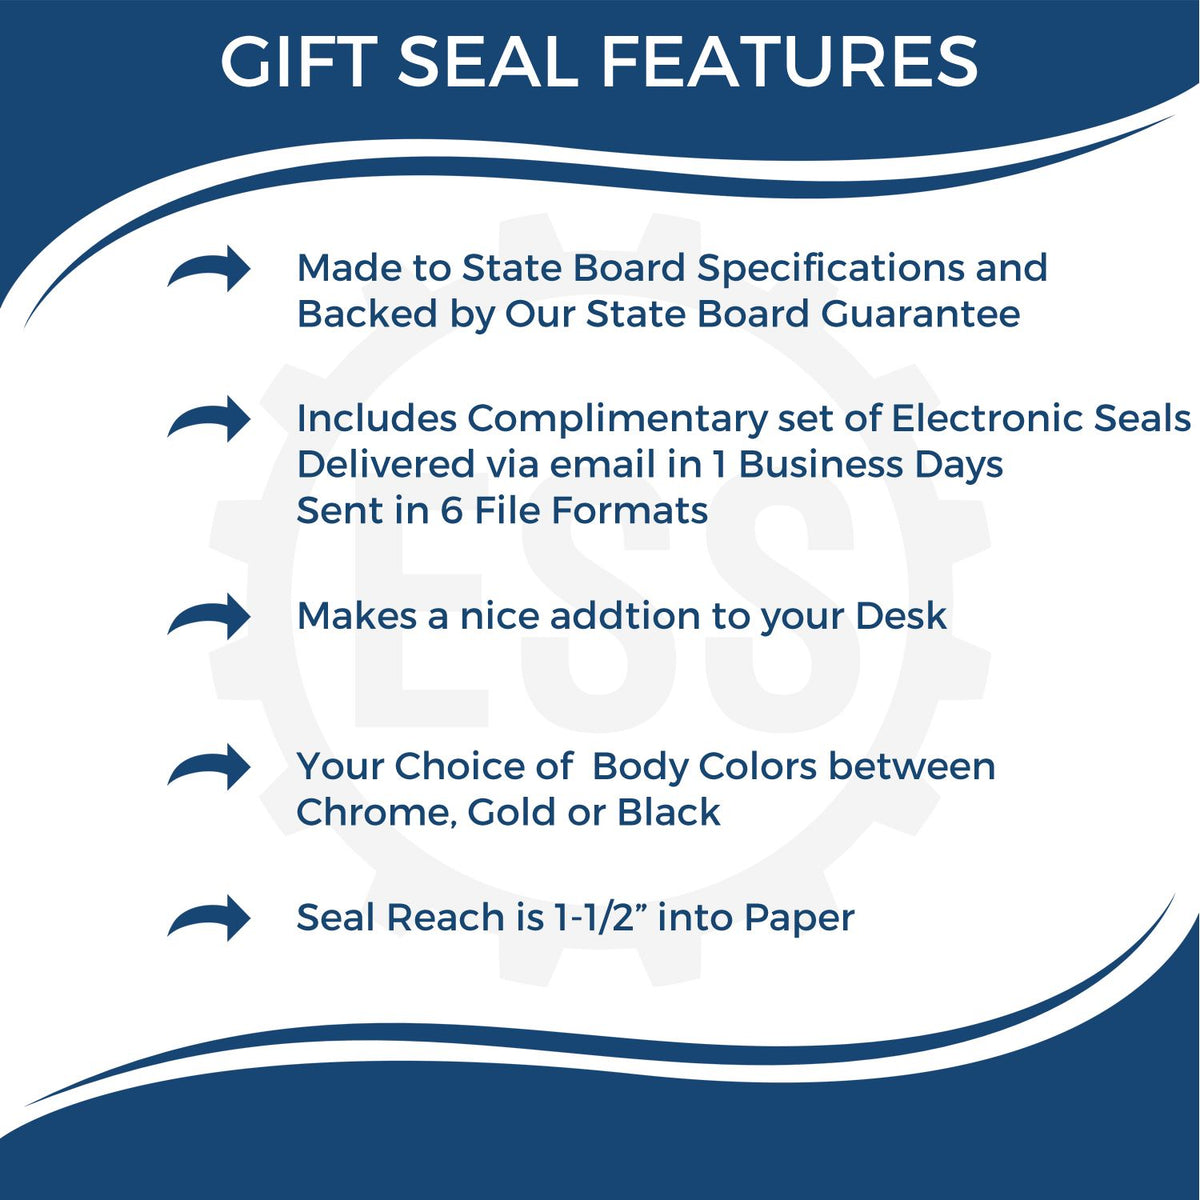 A picture of an infographic highlighting the selling points for the Gift Tennessee Land Surveyor Seal